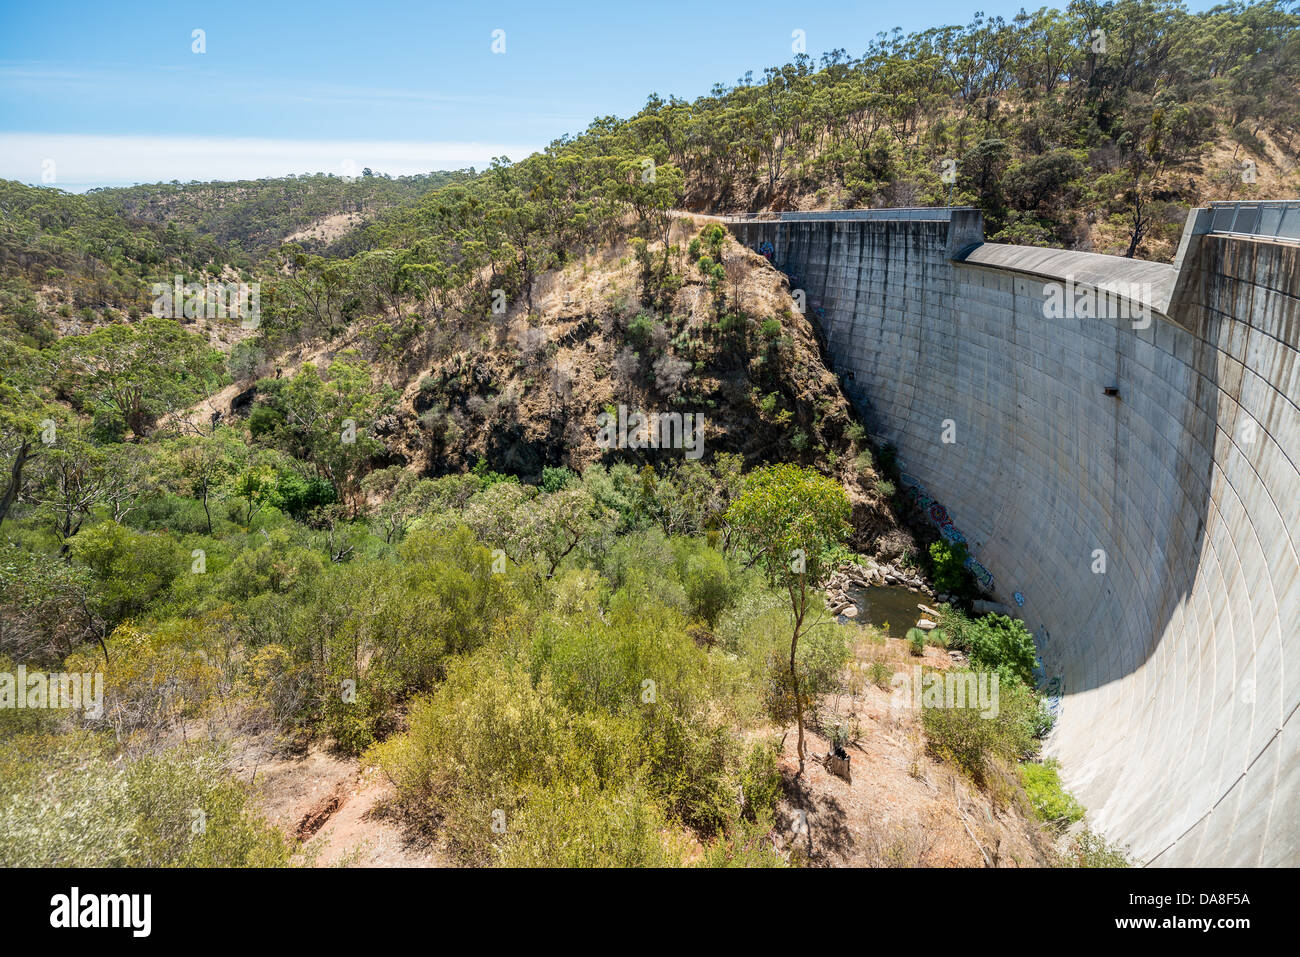 The Sturt Gorge flood control dam preventing major flooding events in the Sturt River. Stock Photo